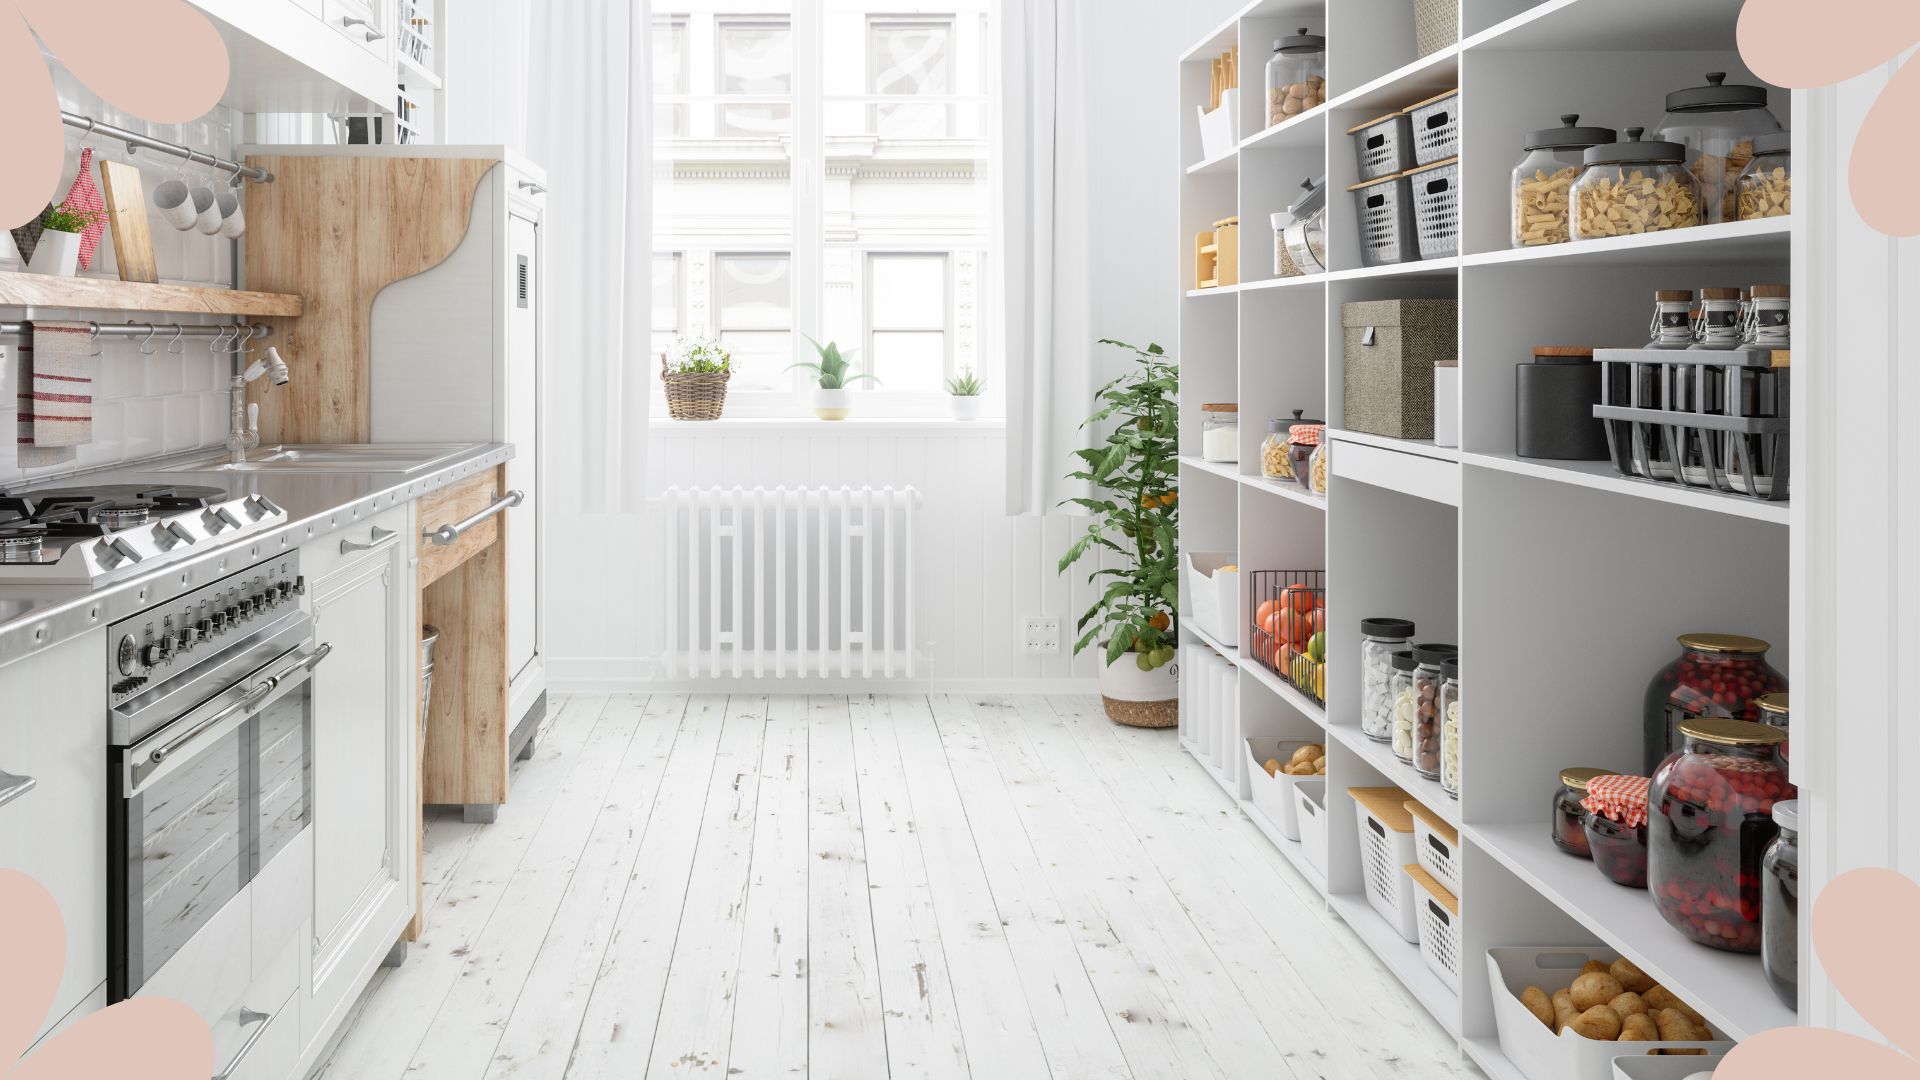 How to Organize Pantry Items: 9 Tips for Effective Kitchen